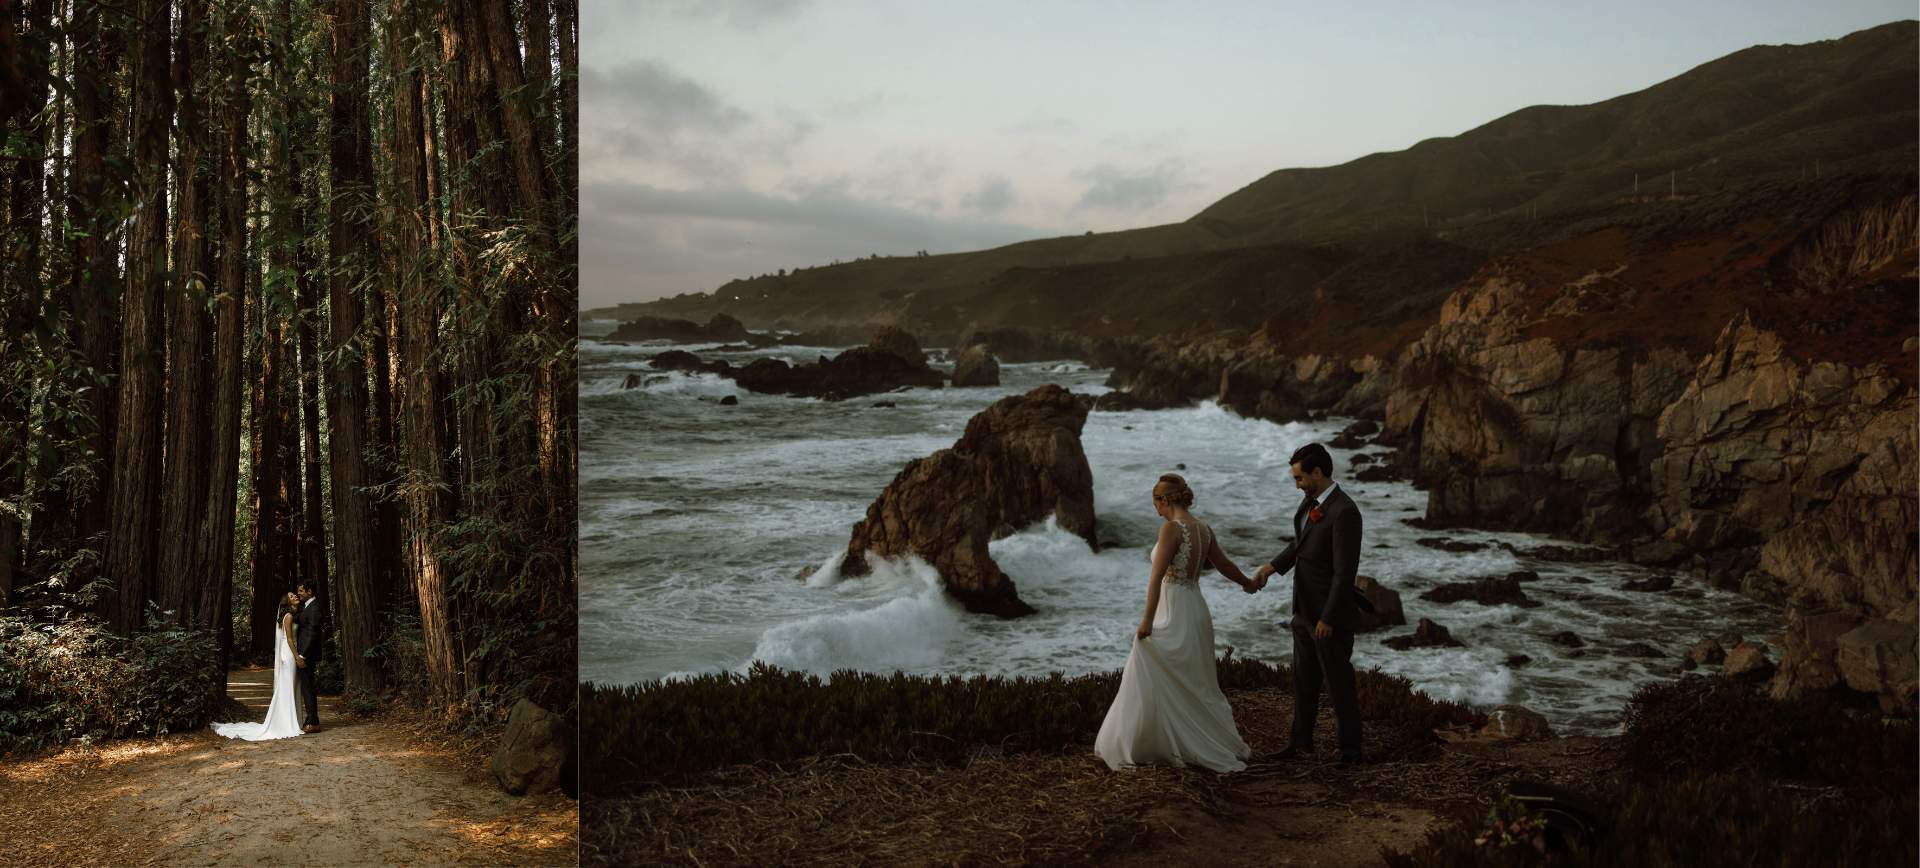 elopement package big sur, california - wedding photos & ceremony in redwood forest & beach